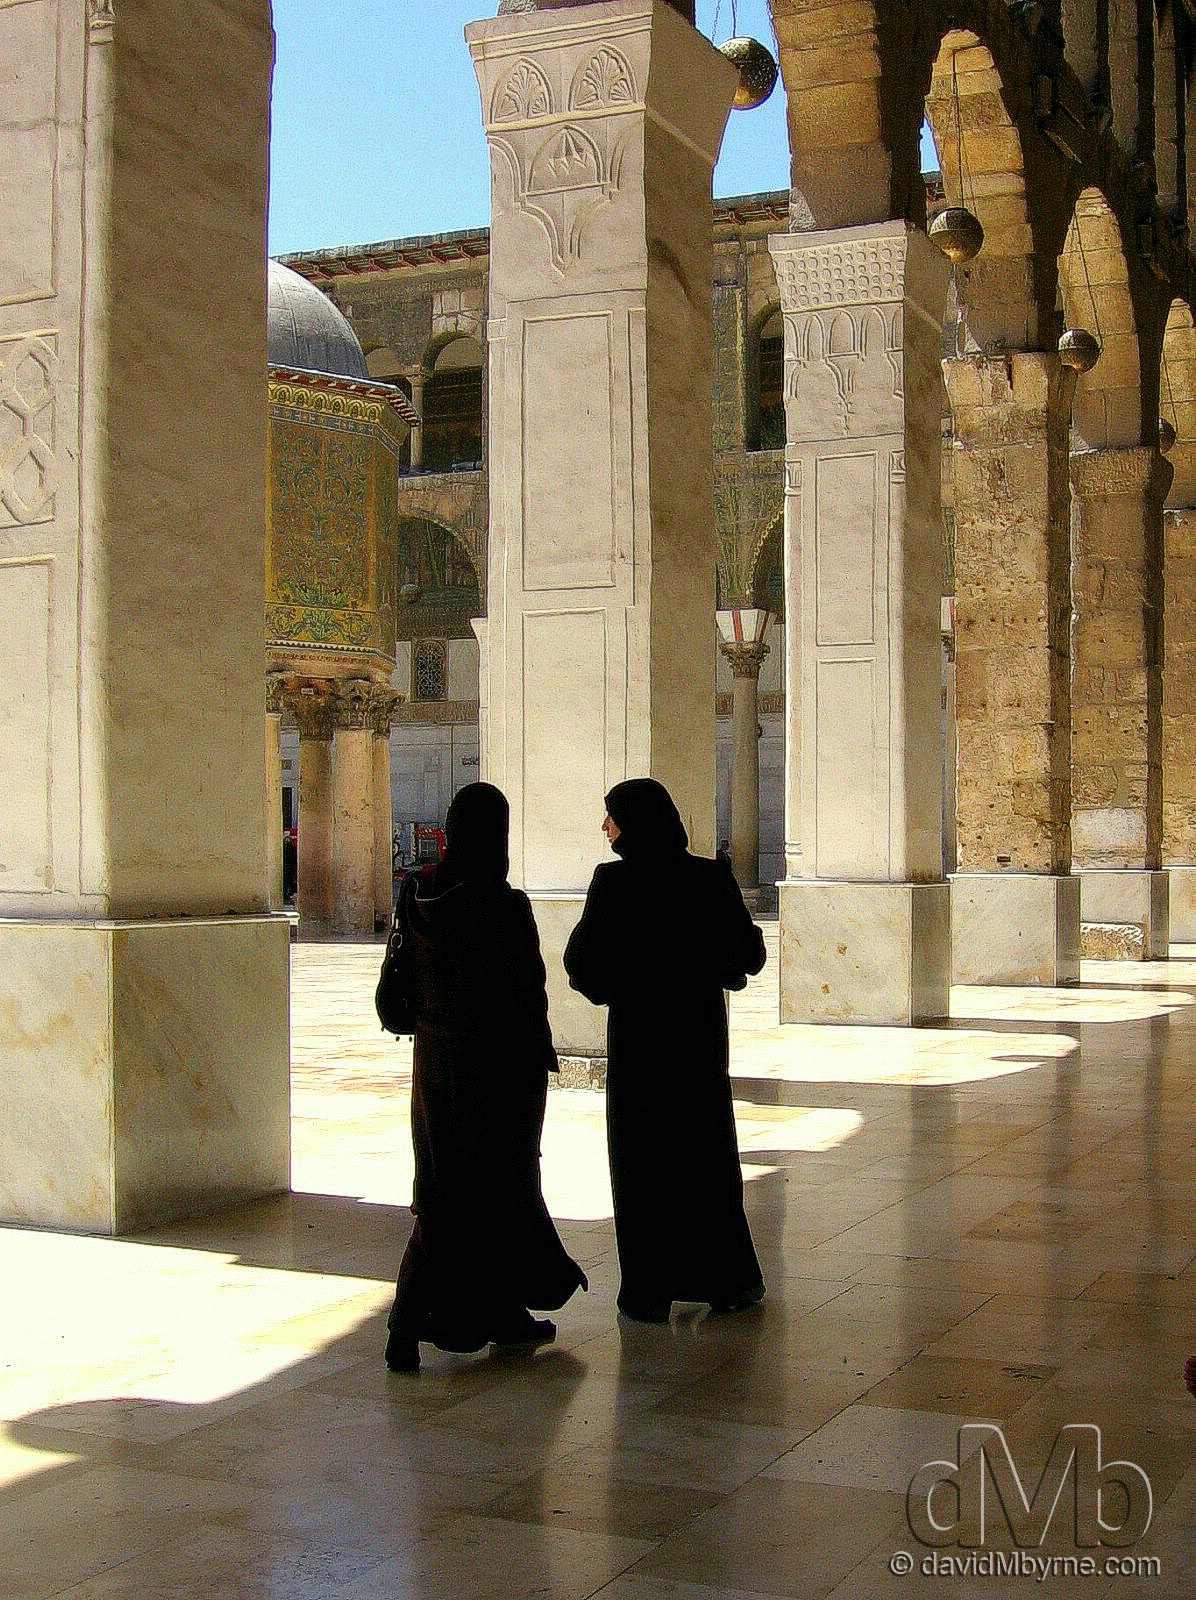 In the courtyard of the Ummayad Mosque in Damascus, Syria. May 5th, 2008.